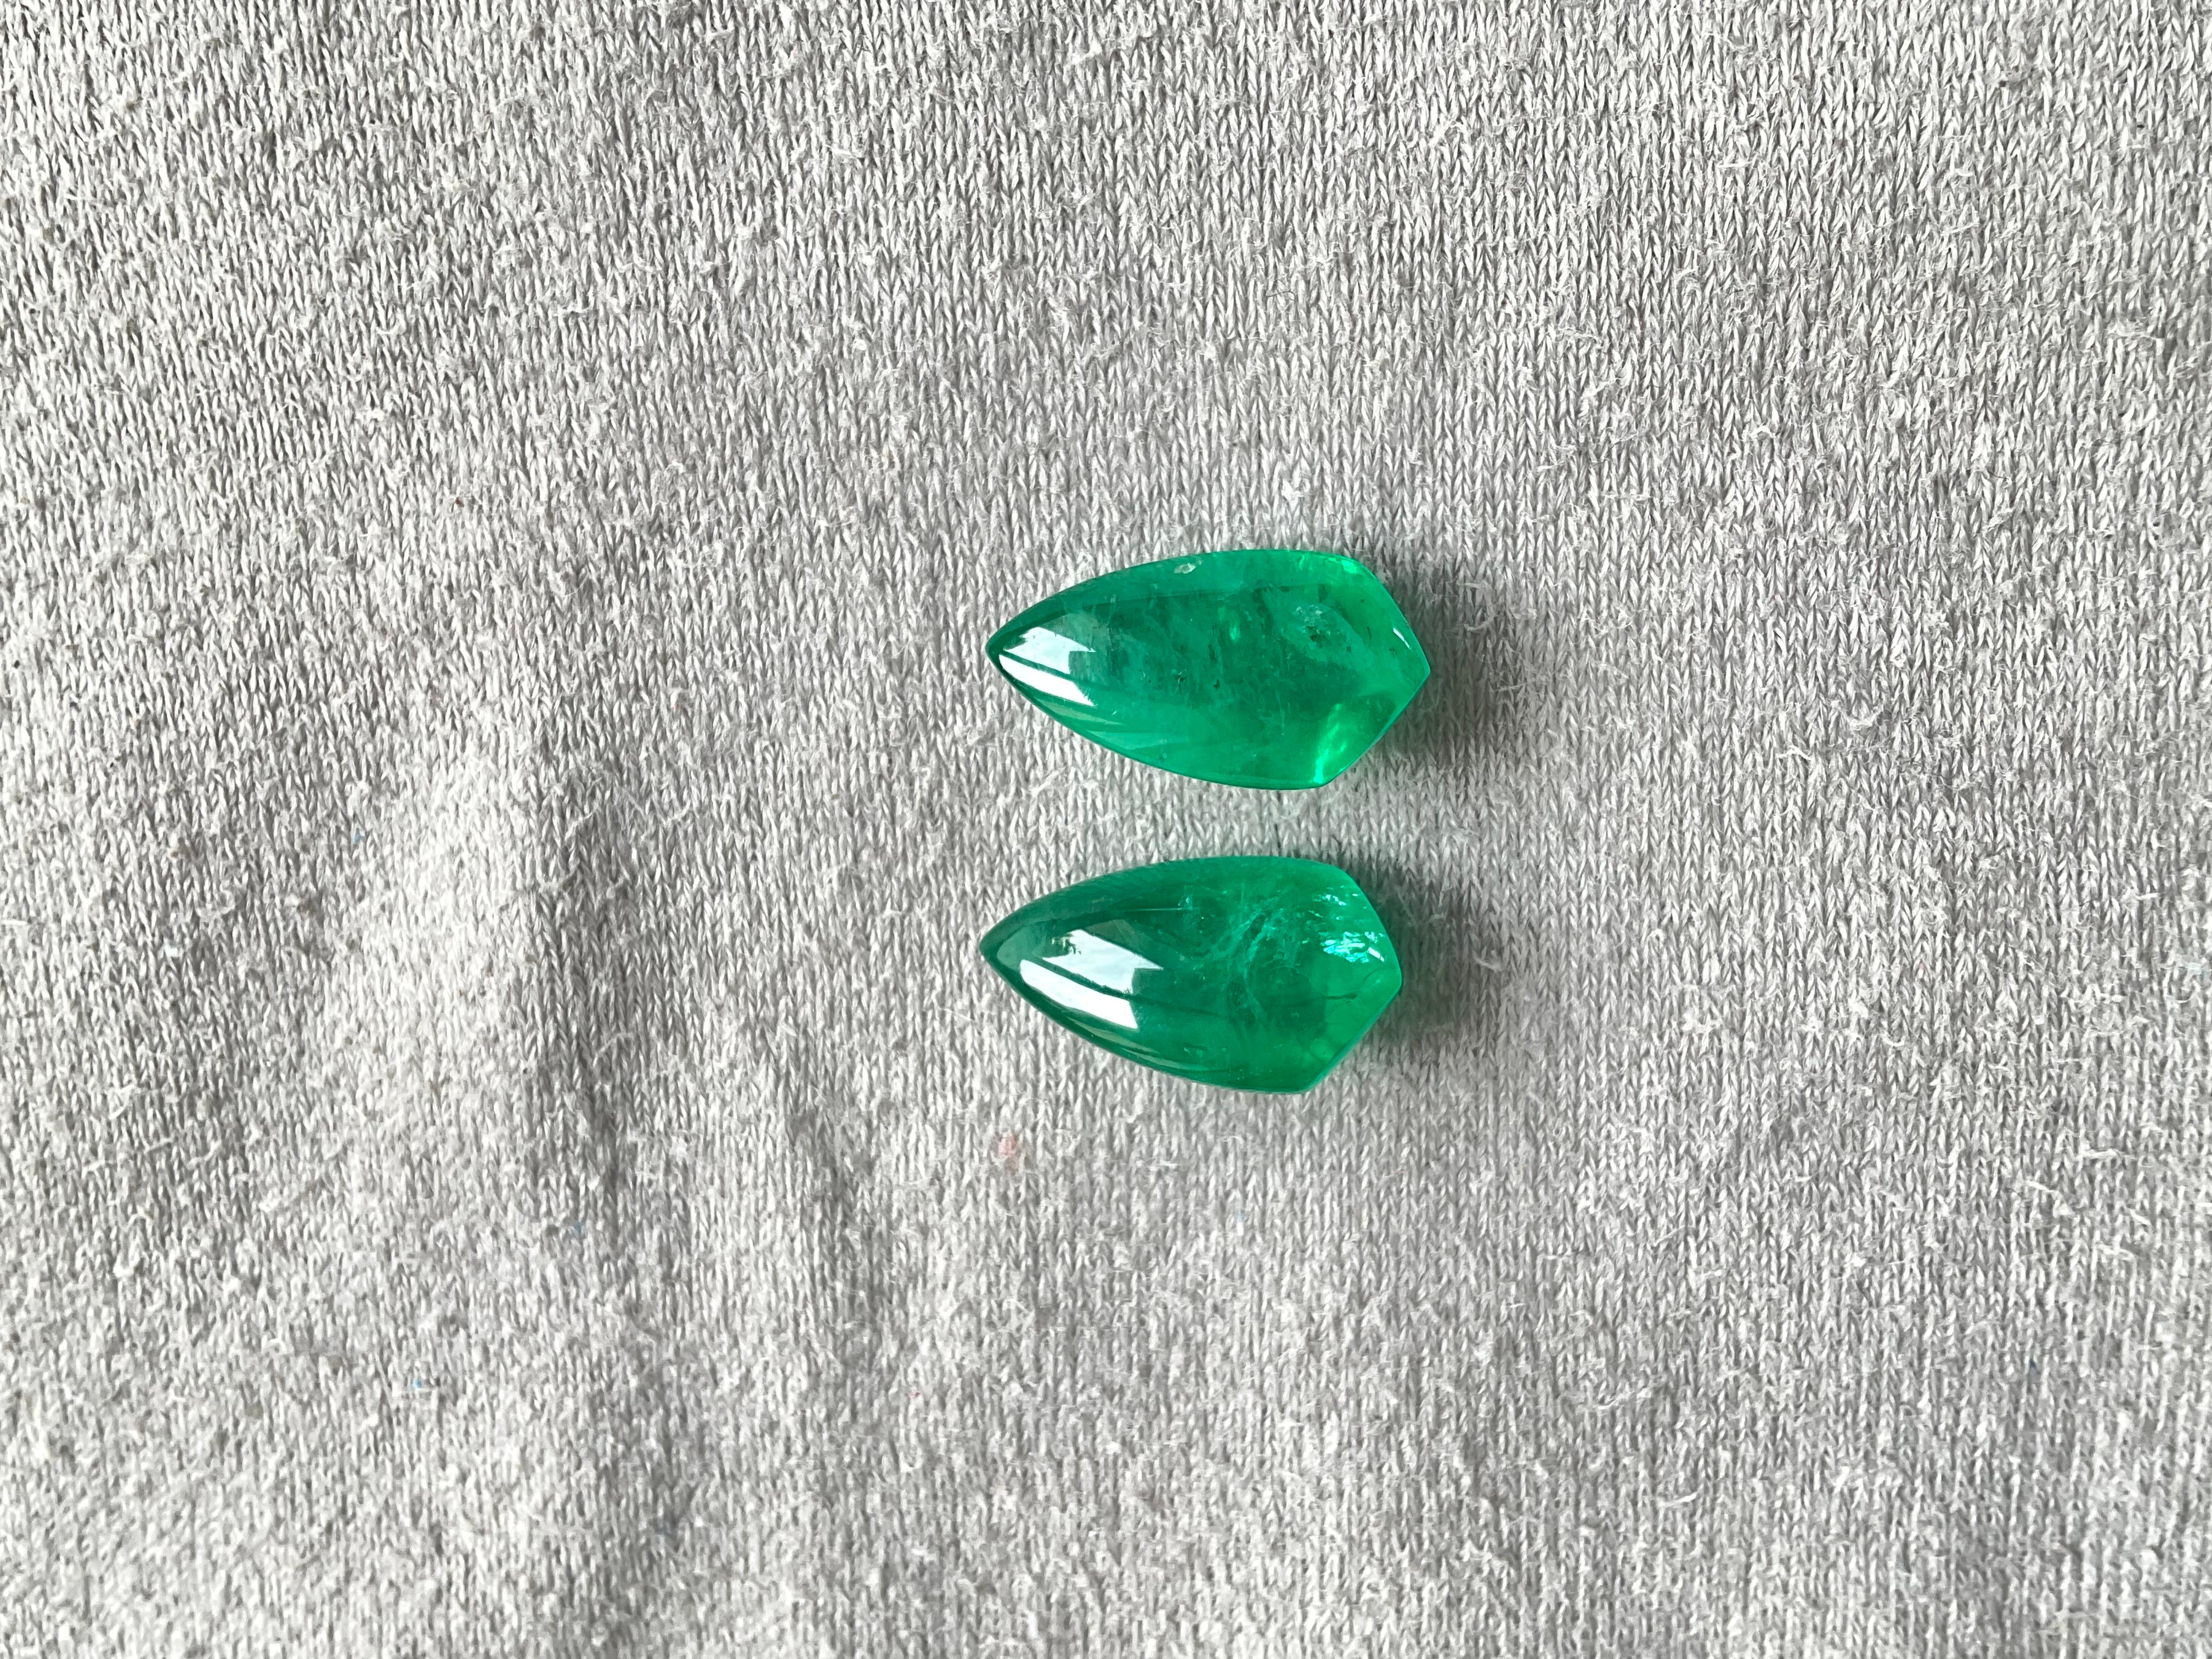 11.50 Carats Zambian Emerald Shield Pair Top Quality For Earrings Natural Gem

Weight: 11.50 Carats
Size: 16x9 MM
Pieces: 2
Shape: Fancy Shield